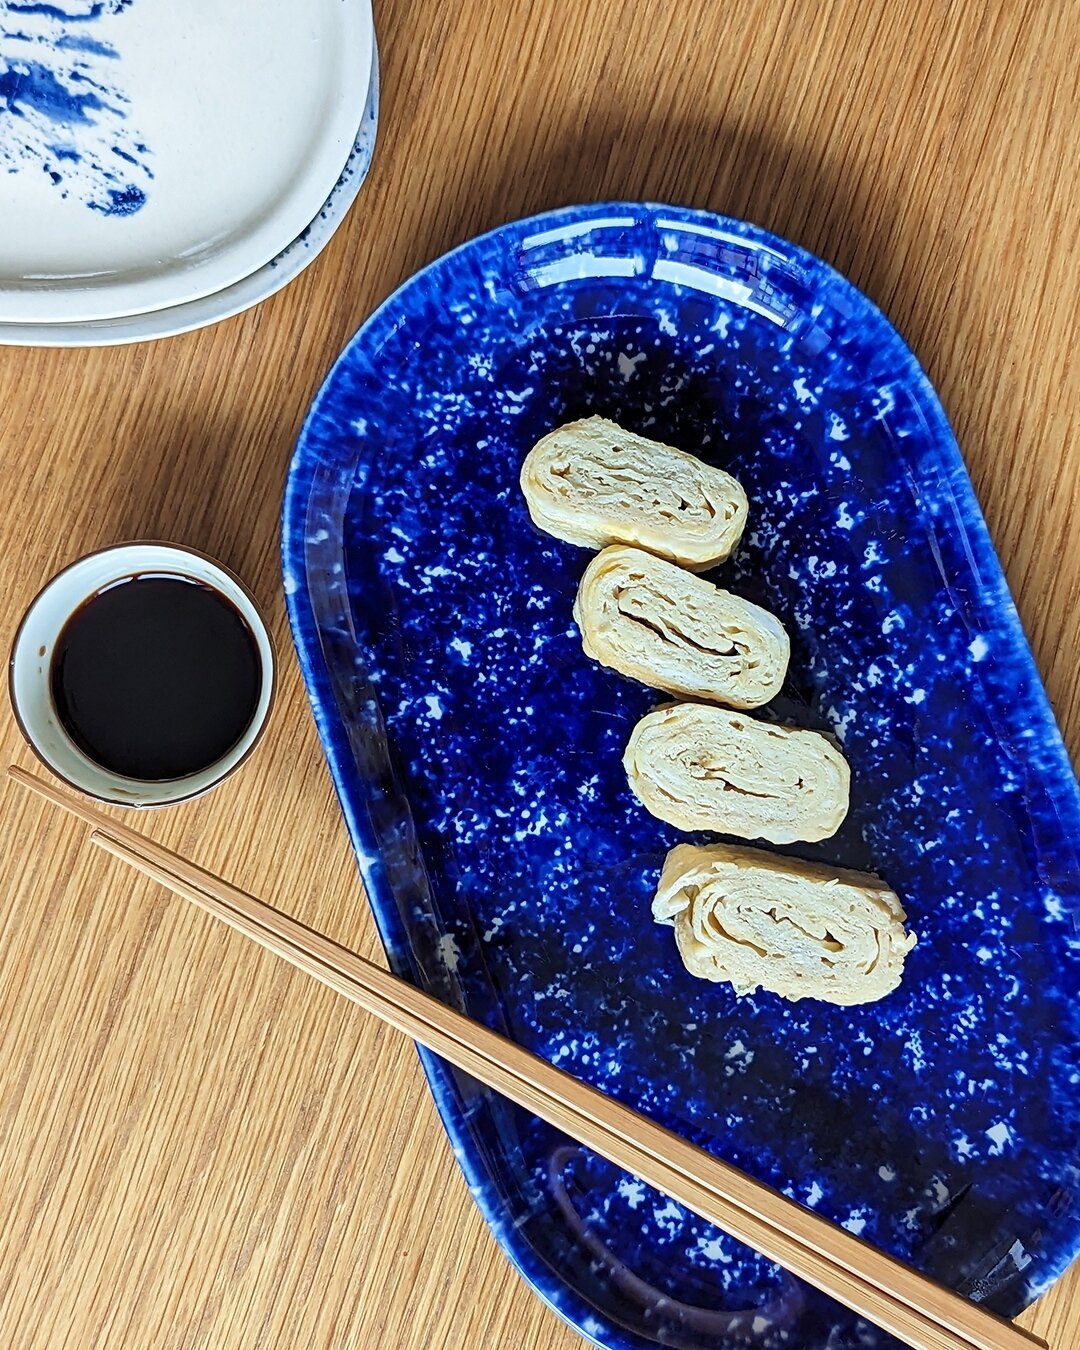 Who else loves a good Tamagoyaki? 🍳⁠
⁠
We do 🙋🏻&zwj;♀️ especially when they are heart shaped 🫶🏻 We made some on @sundaybrunchc4 recently as part of our bento box and they went down a treat 🍱 😋⁠ @greg_james said he loves the egg hearts and @ale